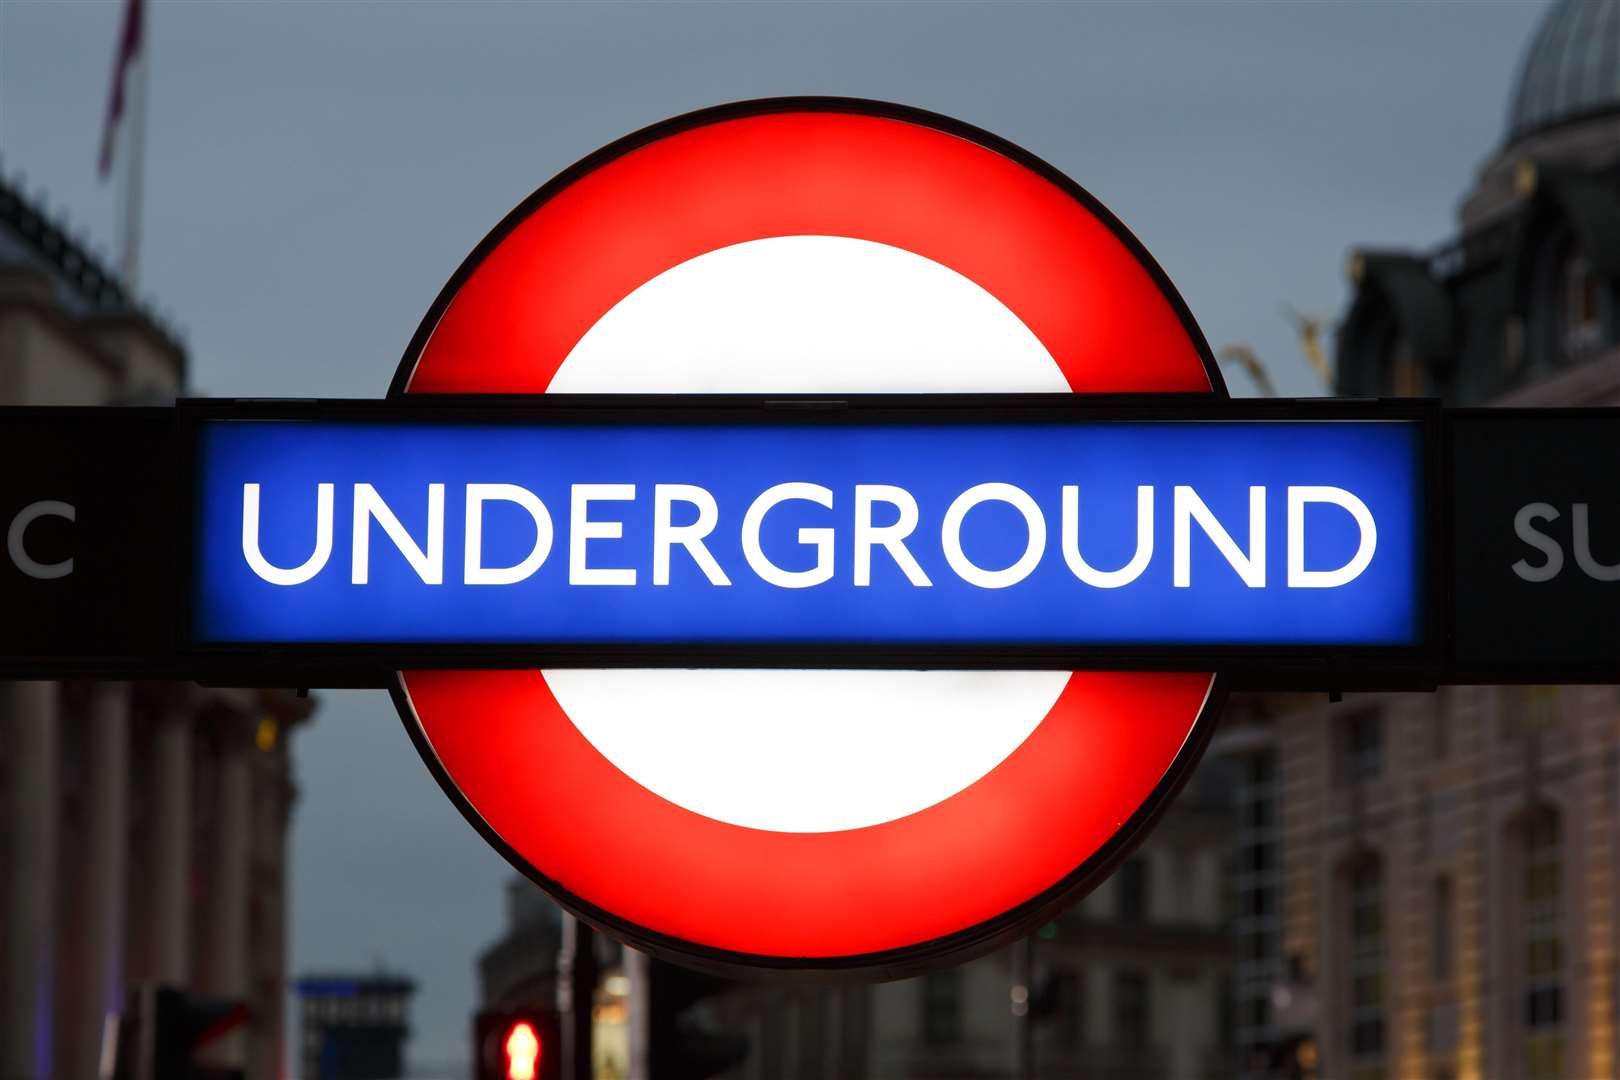 London Underground services will also be affected